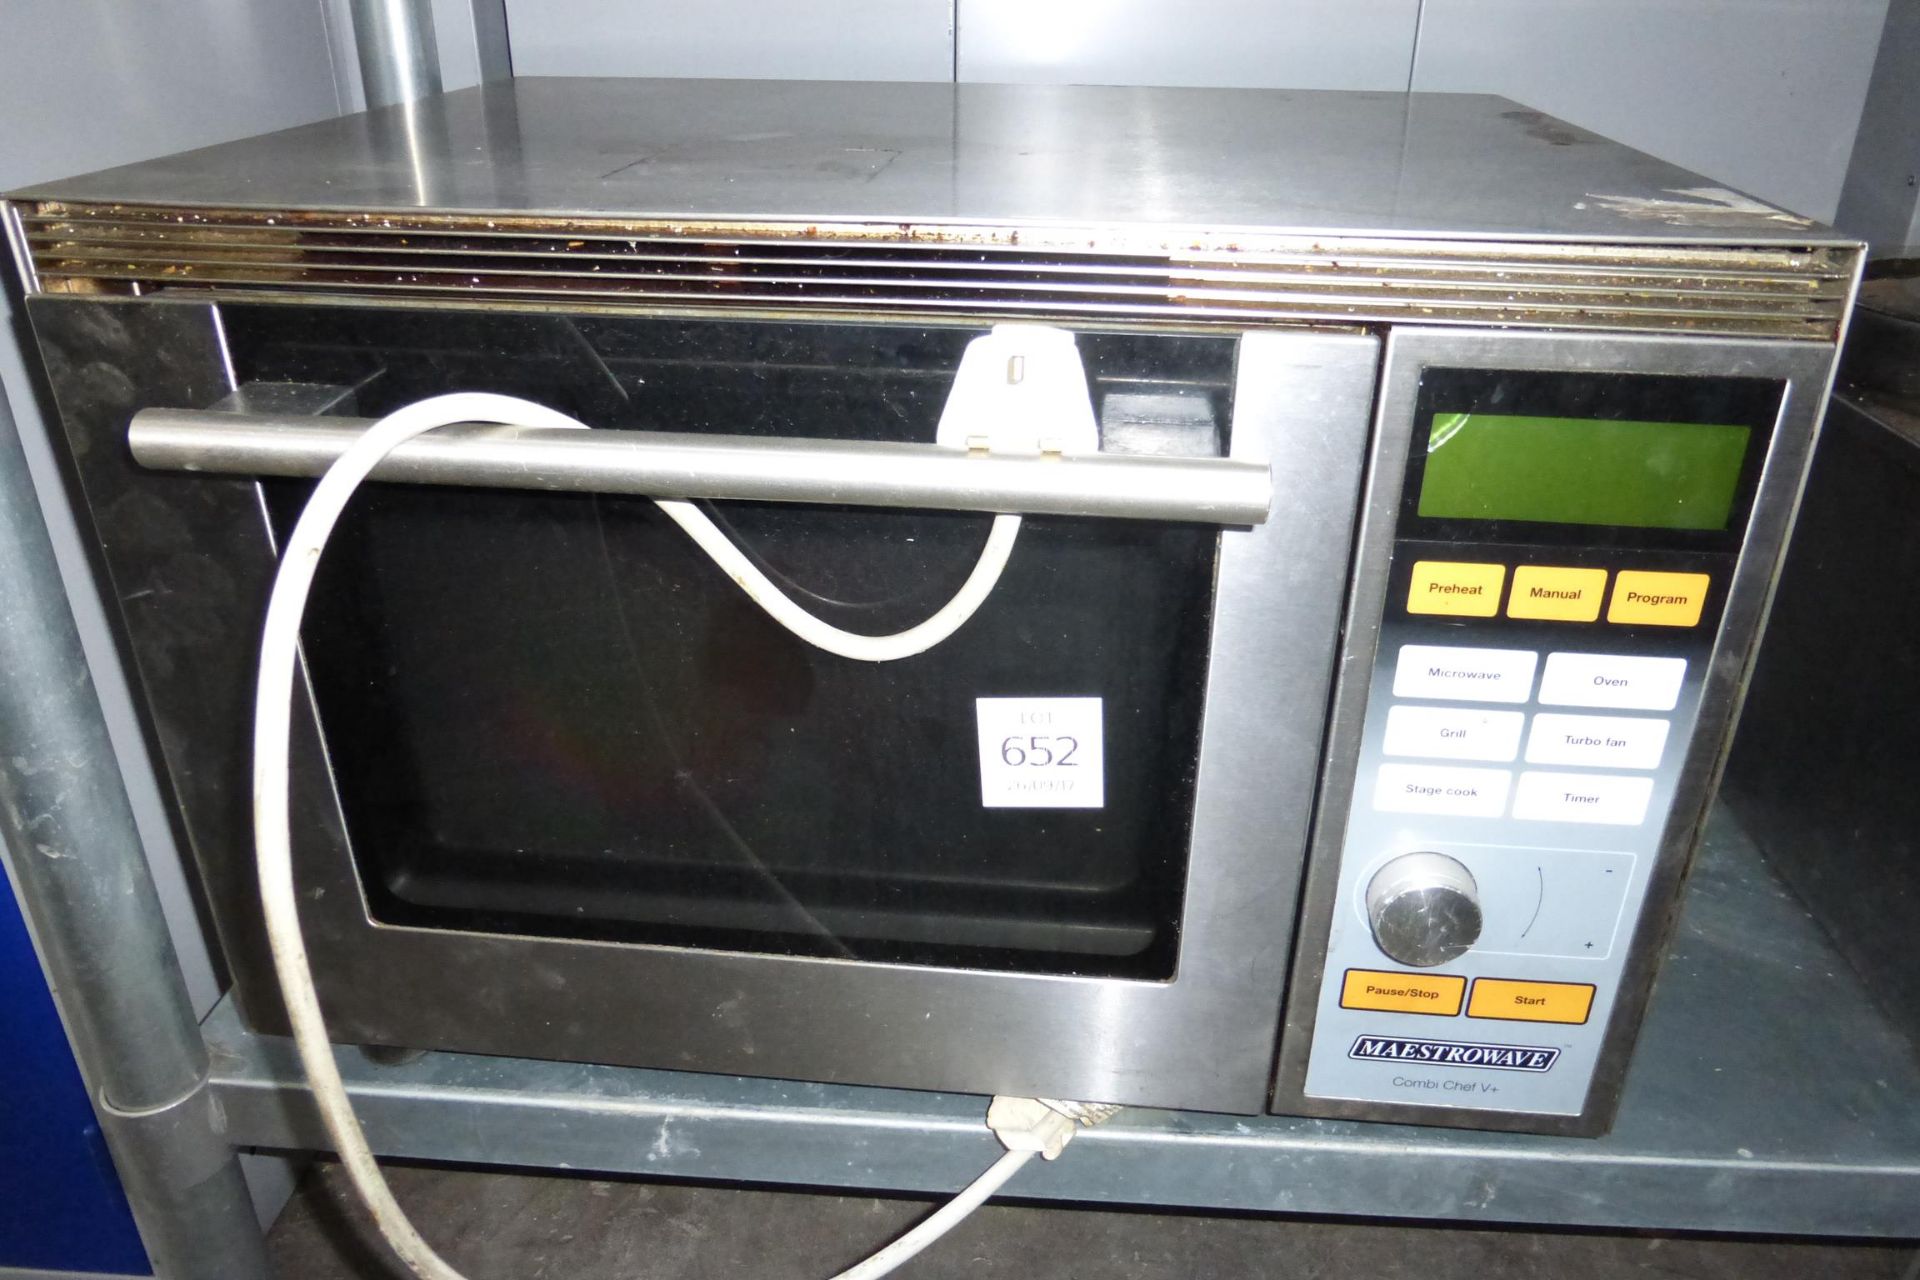 A Maestrowave Combi Chef V+.